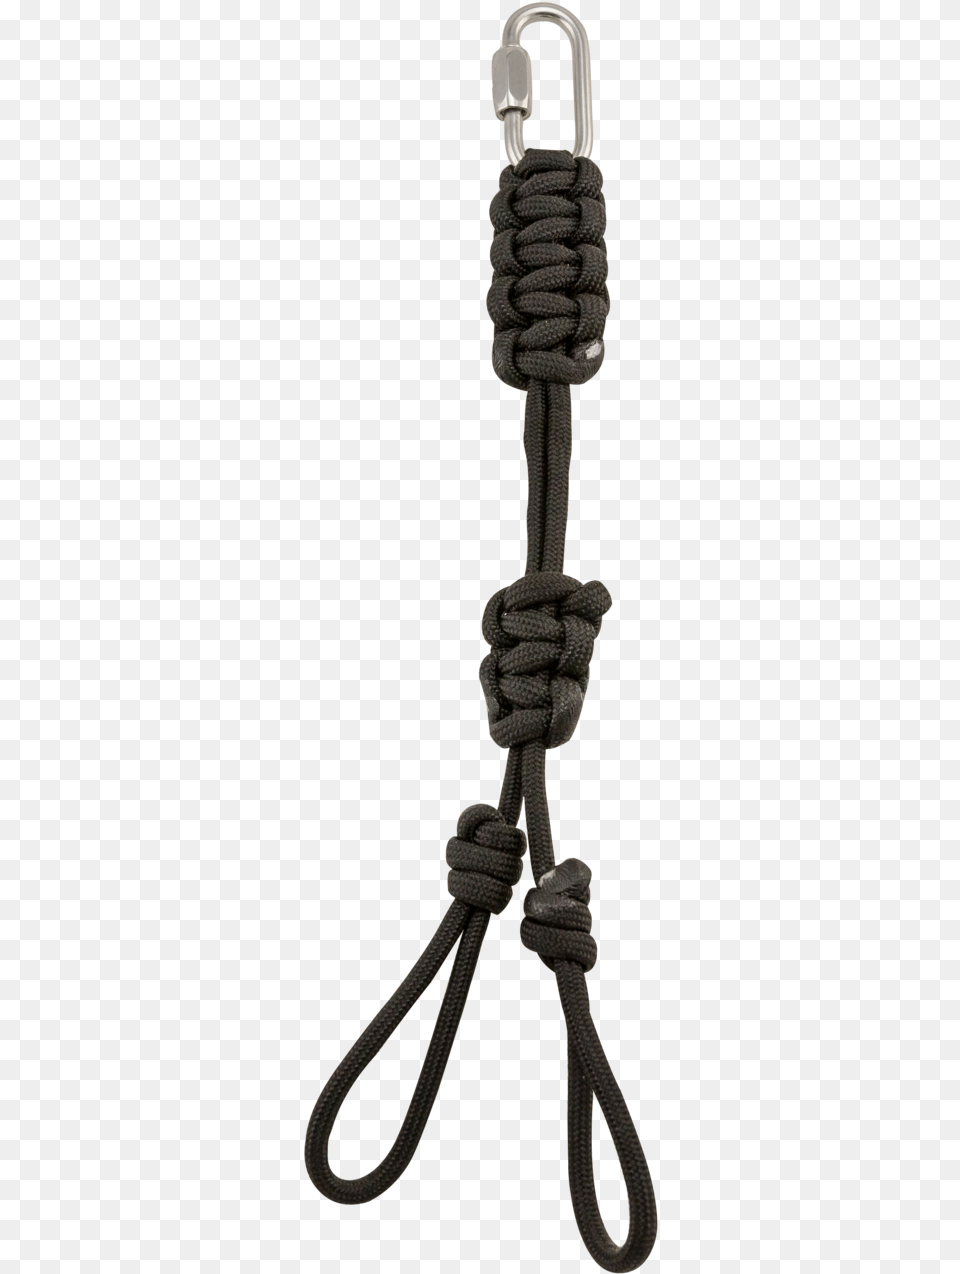 Universal Lanyard Drop Leather, Rope, Knot, Accessories, Jewelry Png Image